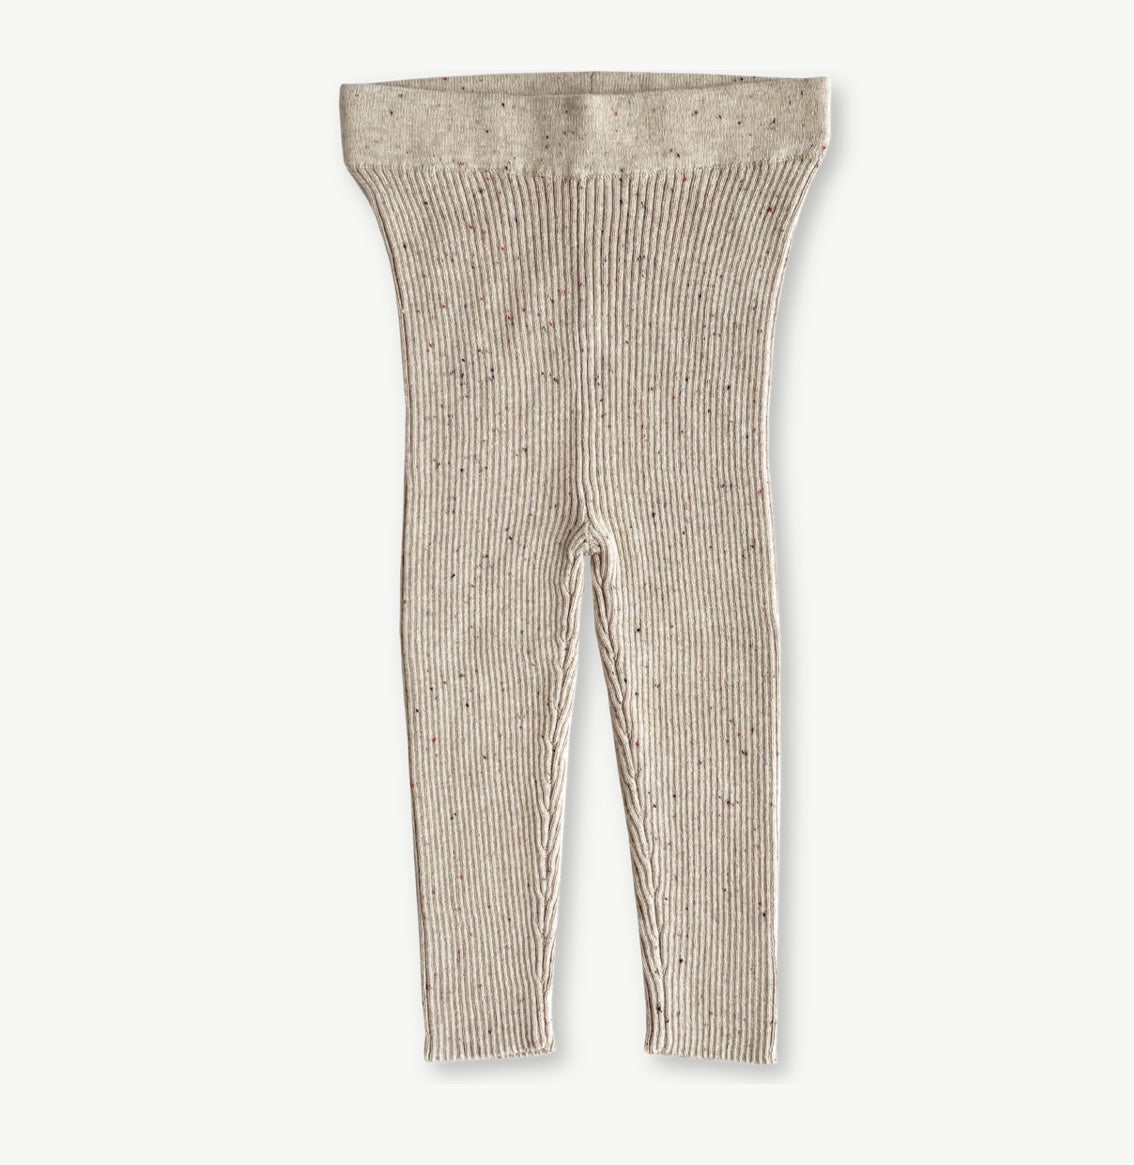 Grown - Ribbed Leggings, Fawn Speckle